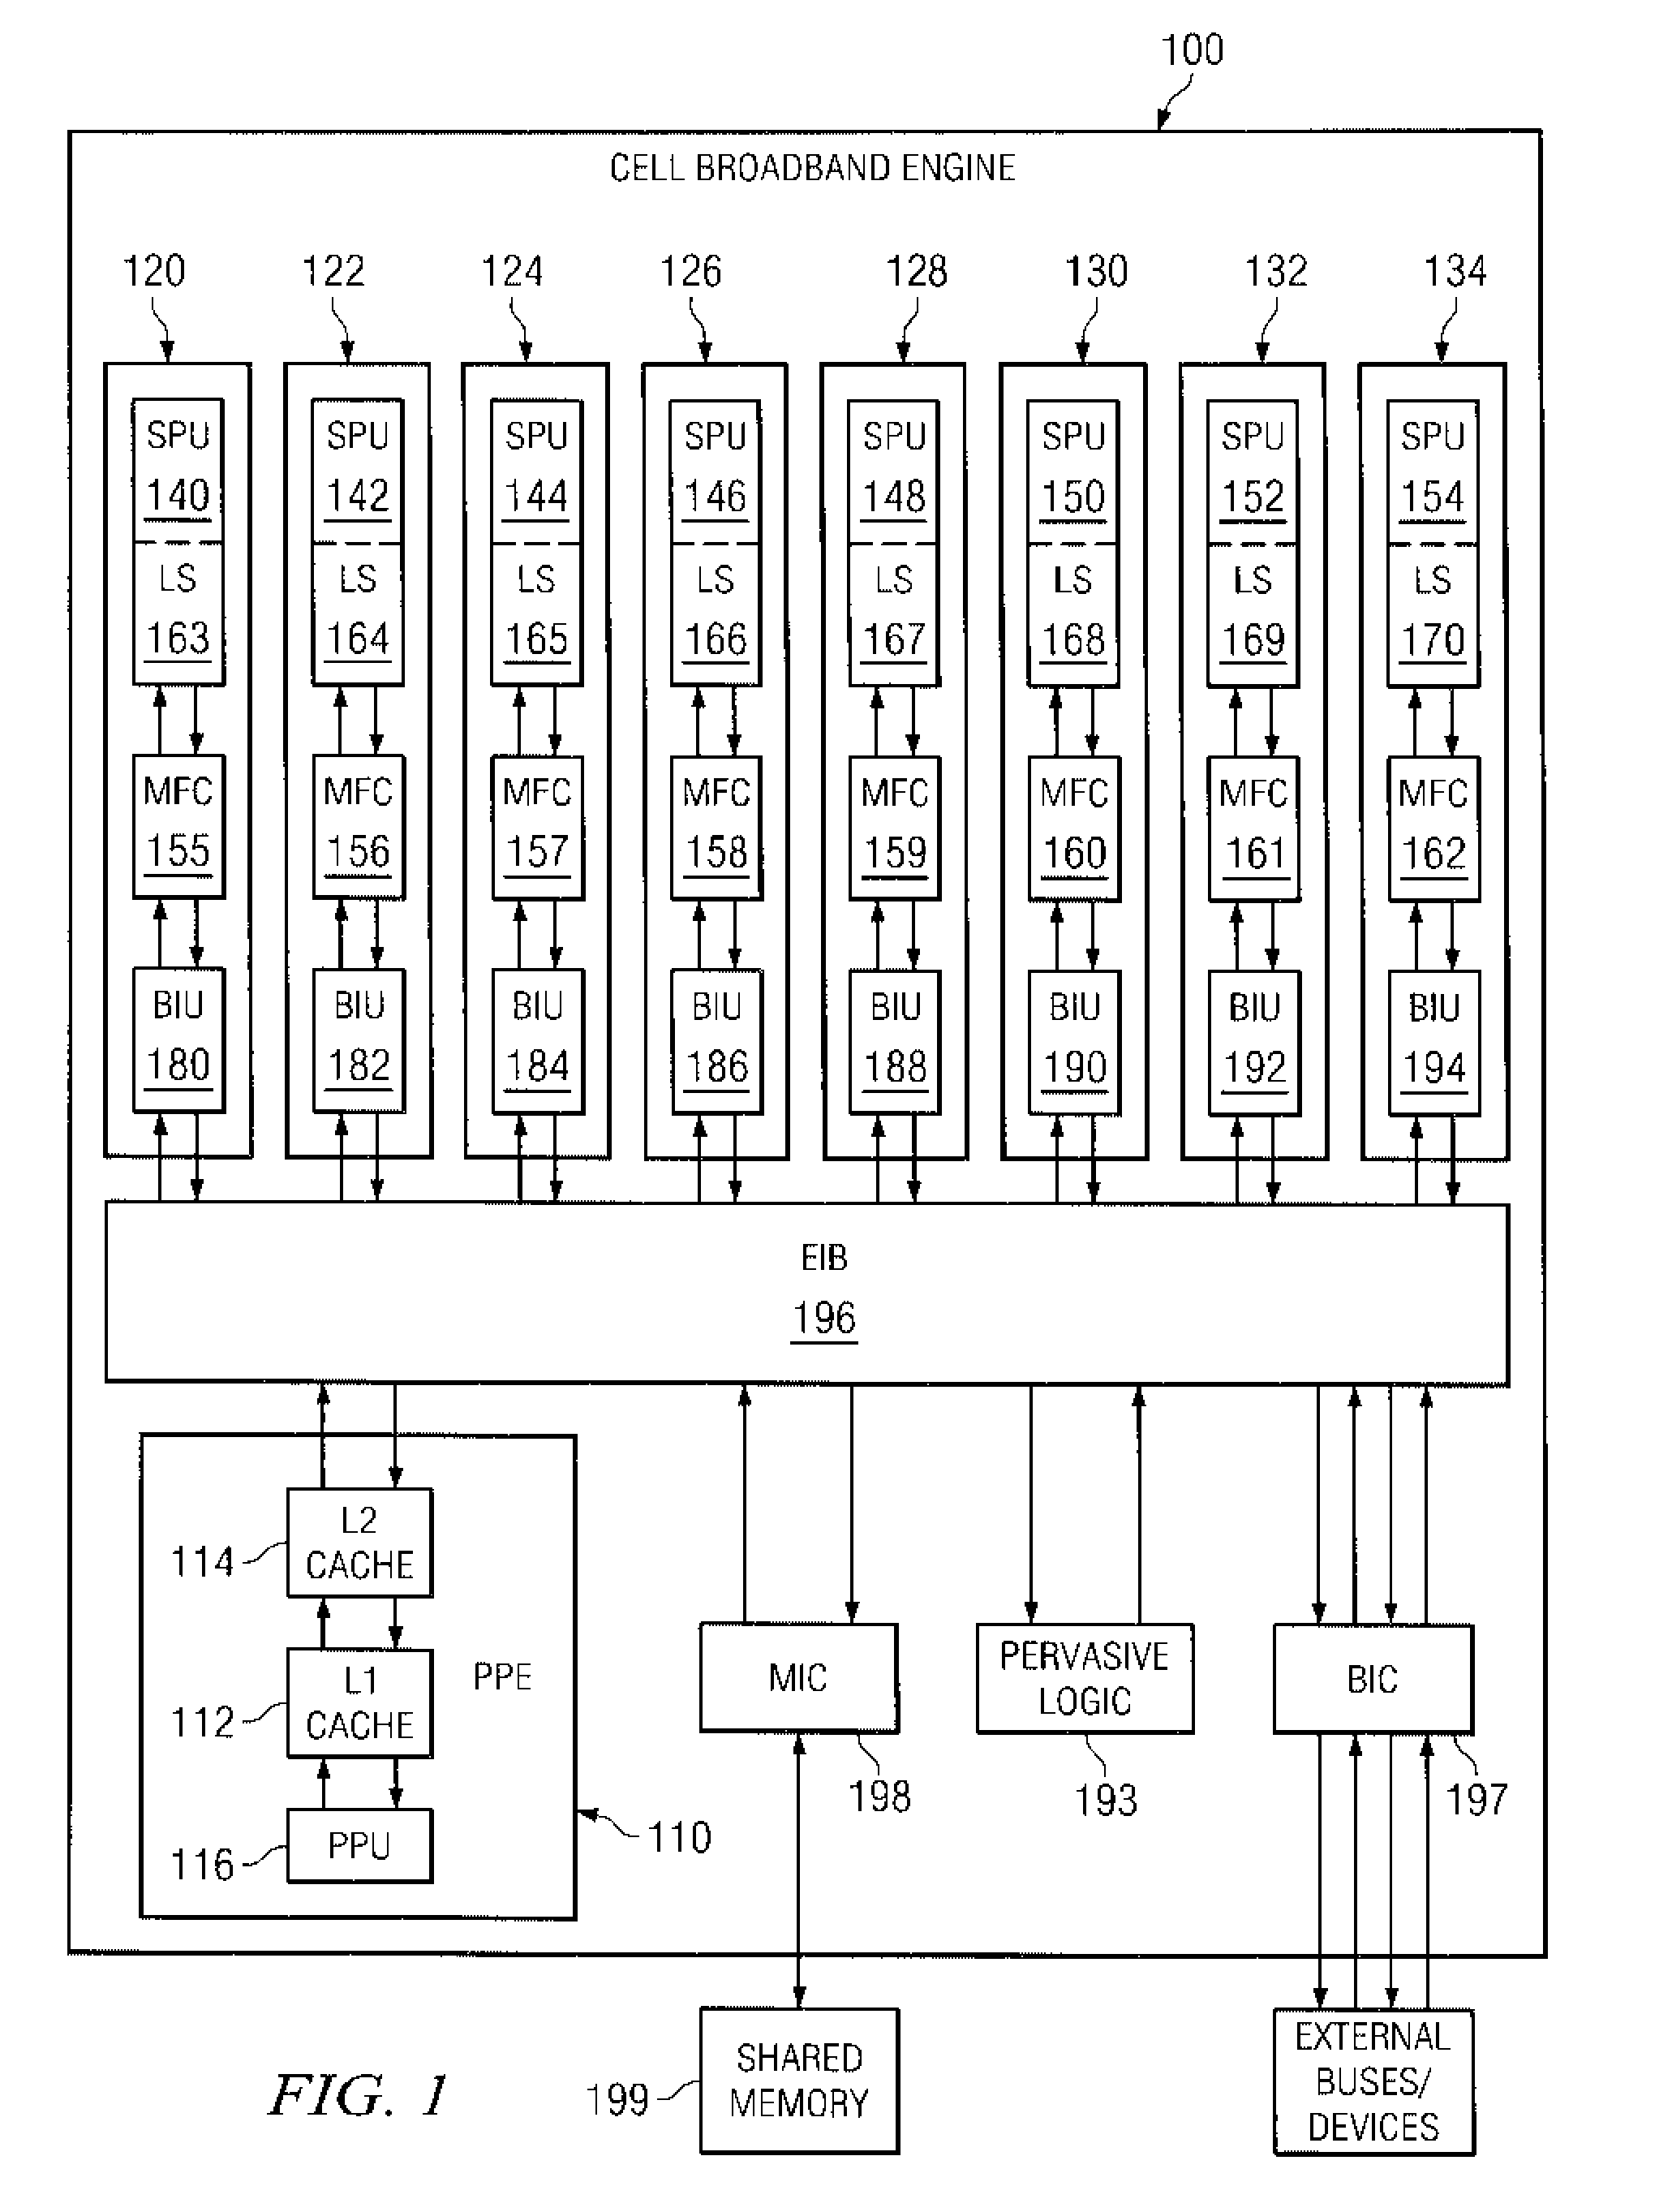 System and method for selecting a random processor to boot on a multiprocessor system